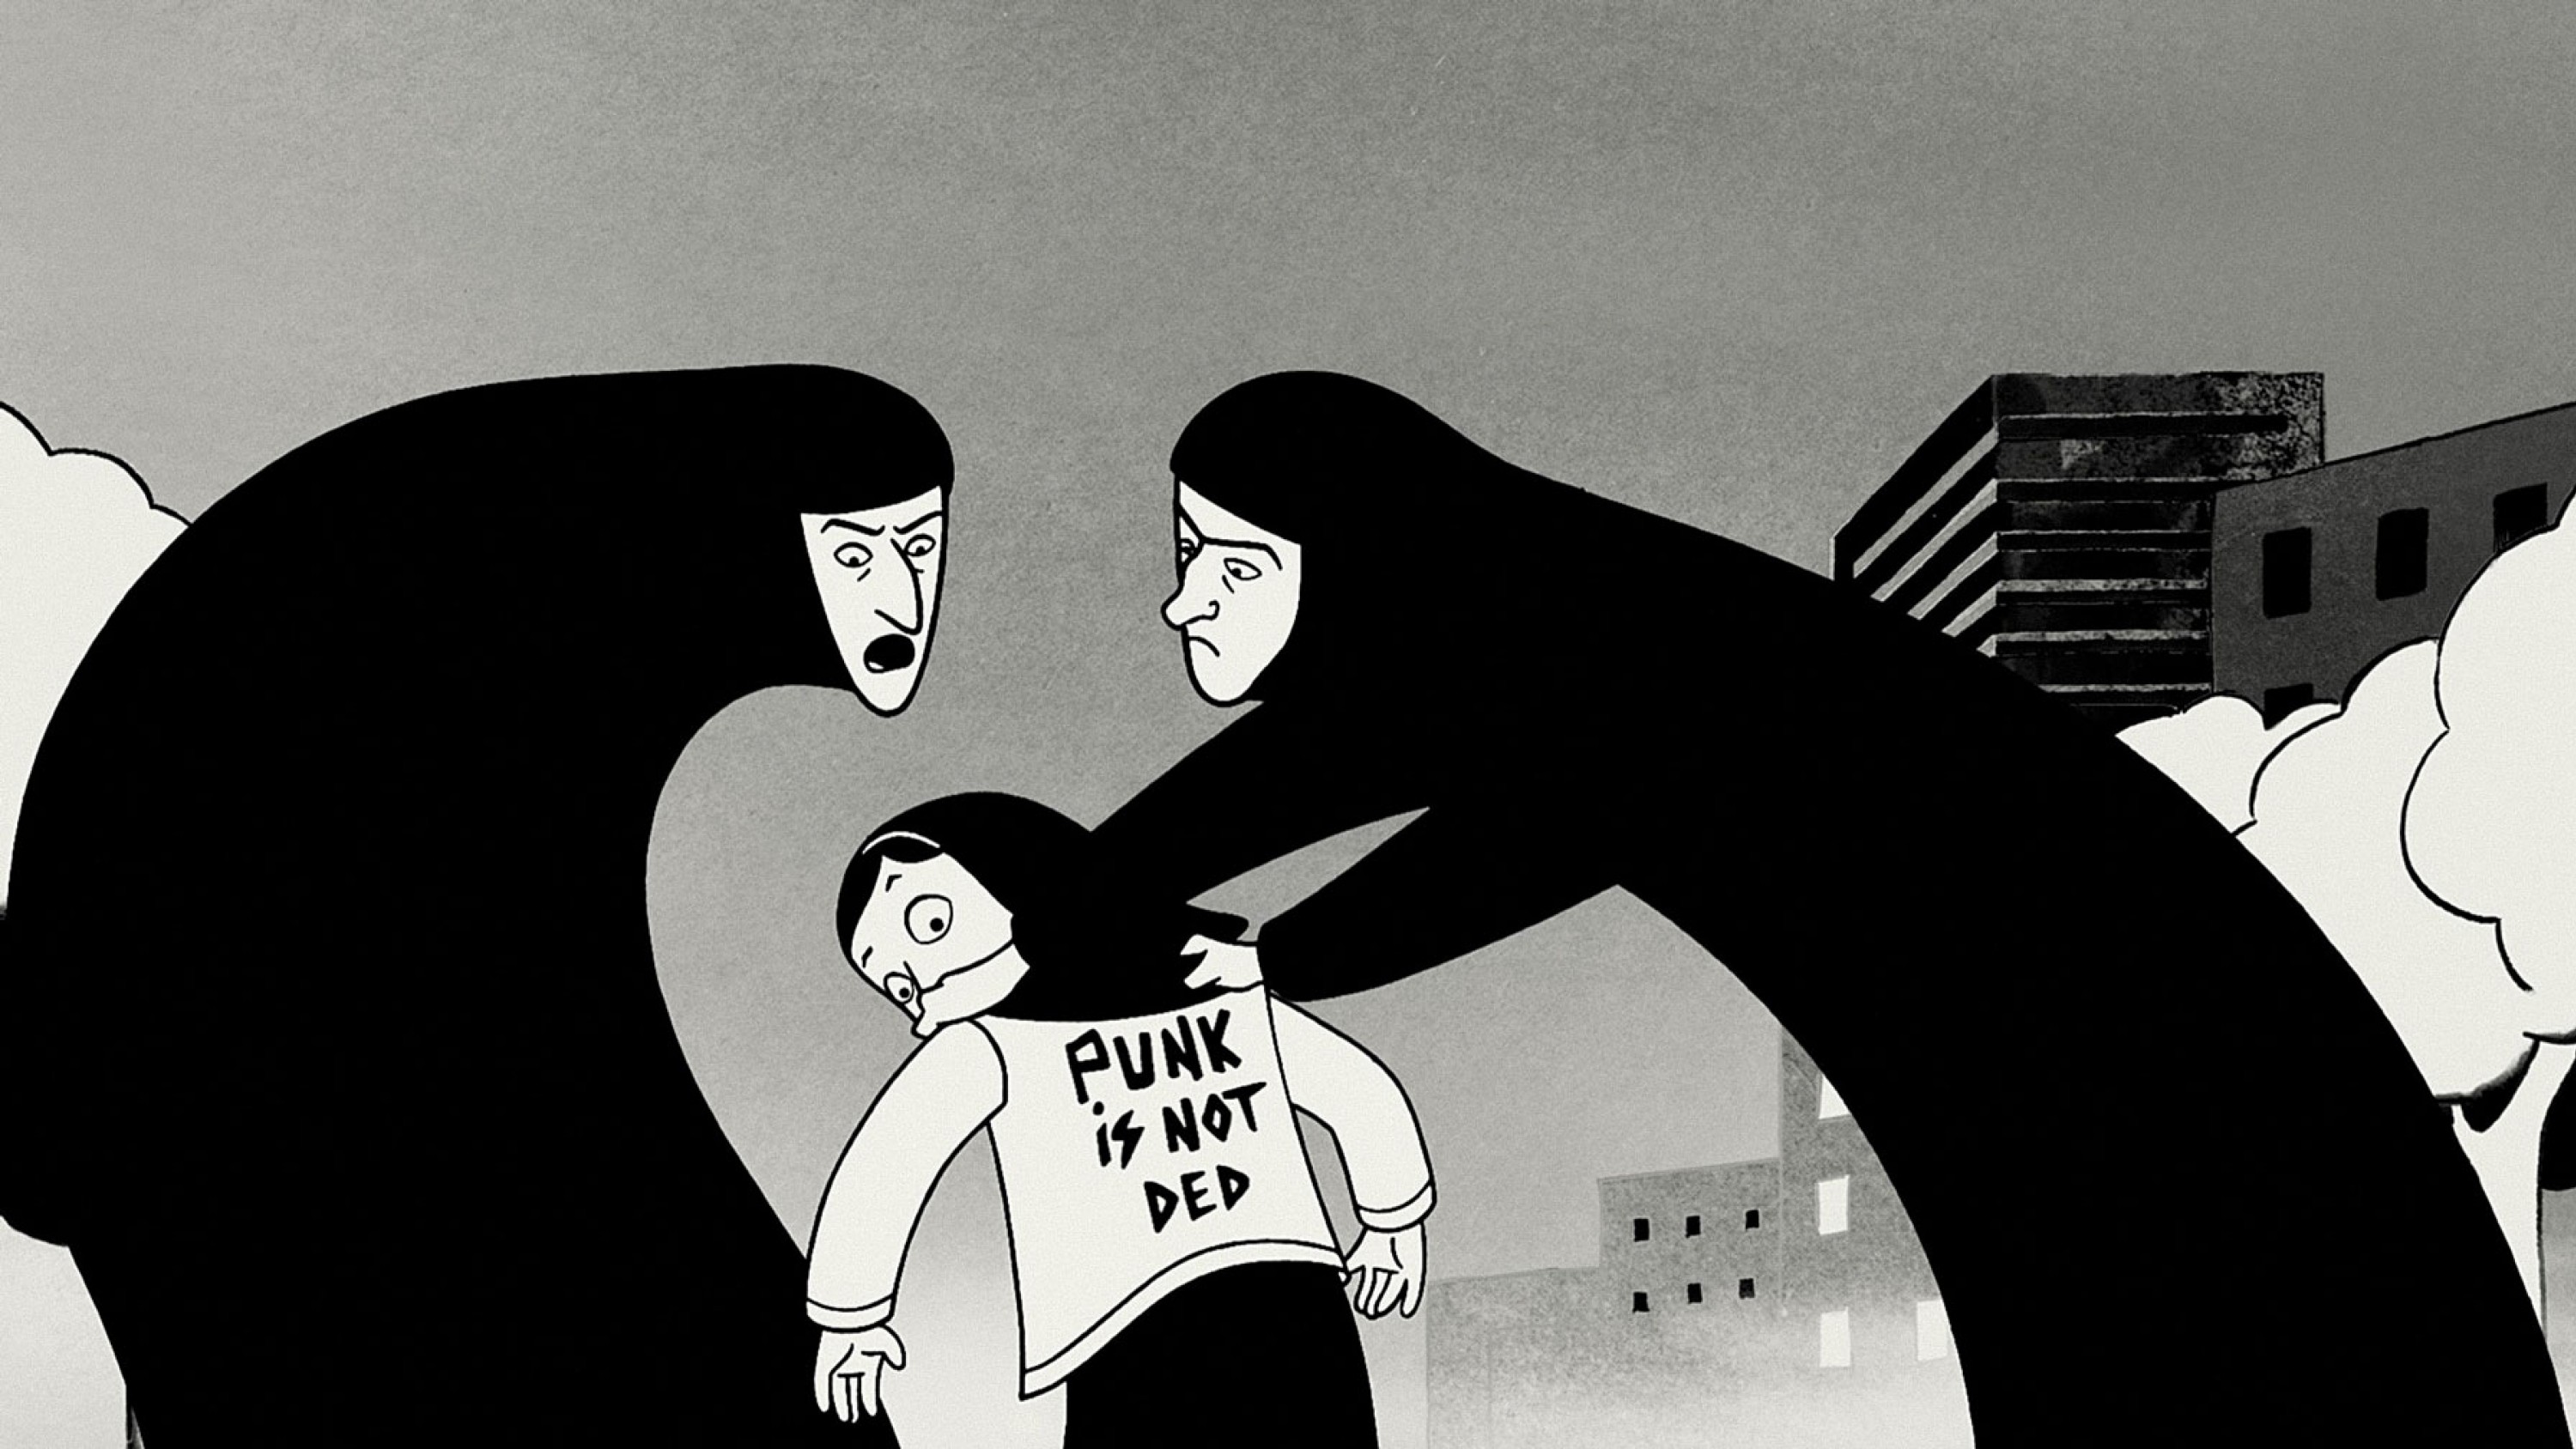 black and white image of a girl being reprimanded for wearing a jacket that reads "punk is not ded"